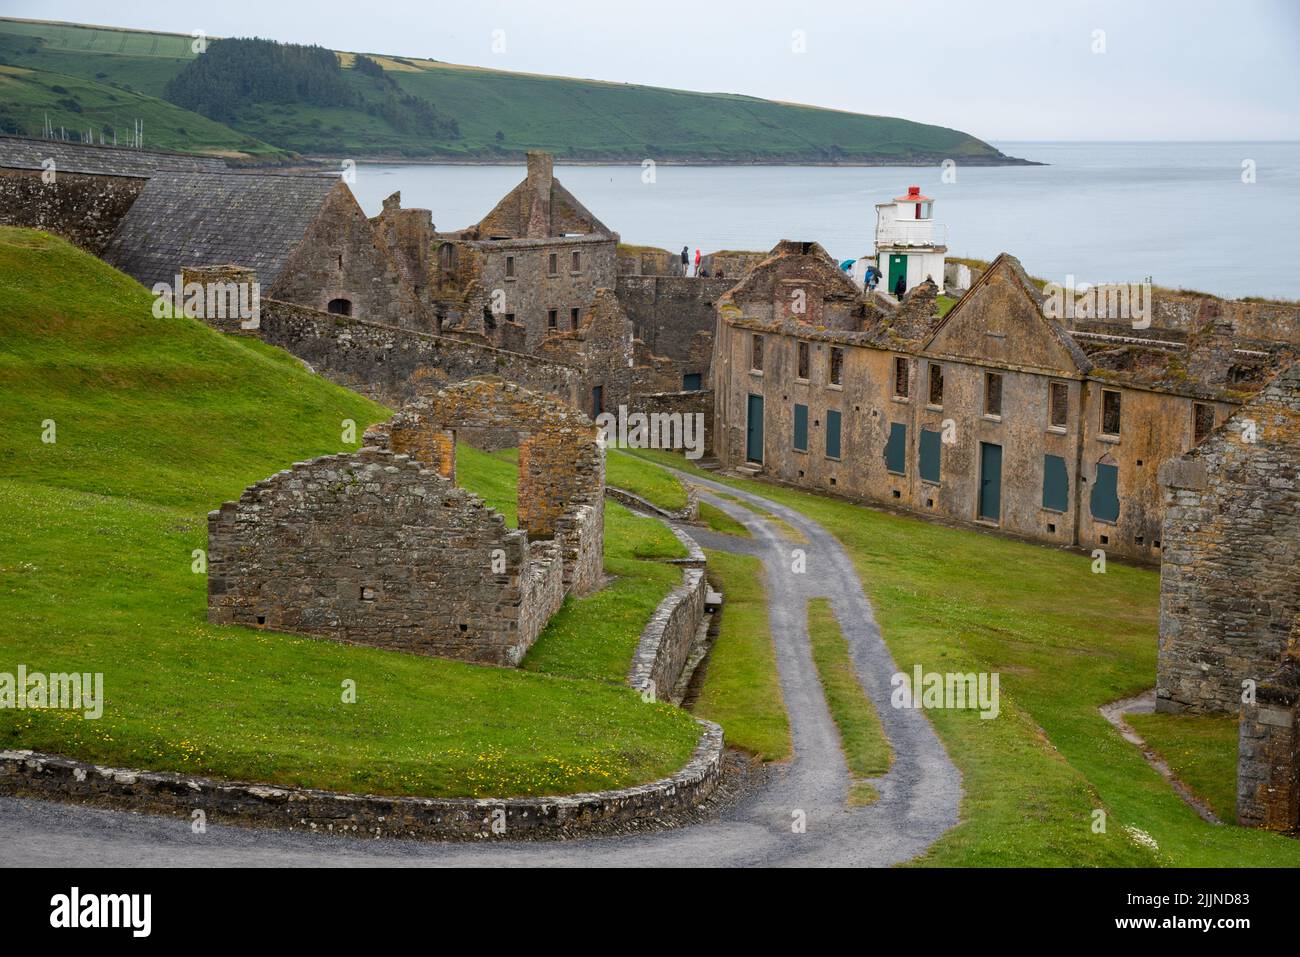 Charles fort and castle abandoned historic buildings Kinsale Ireland Stock Photo